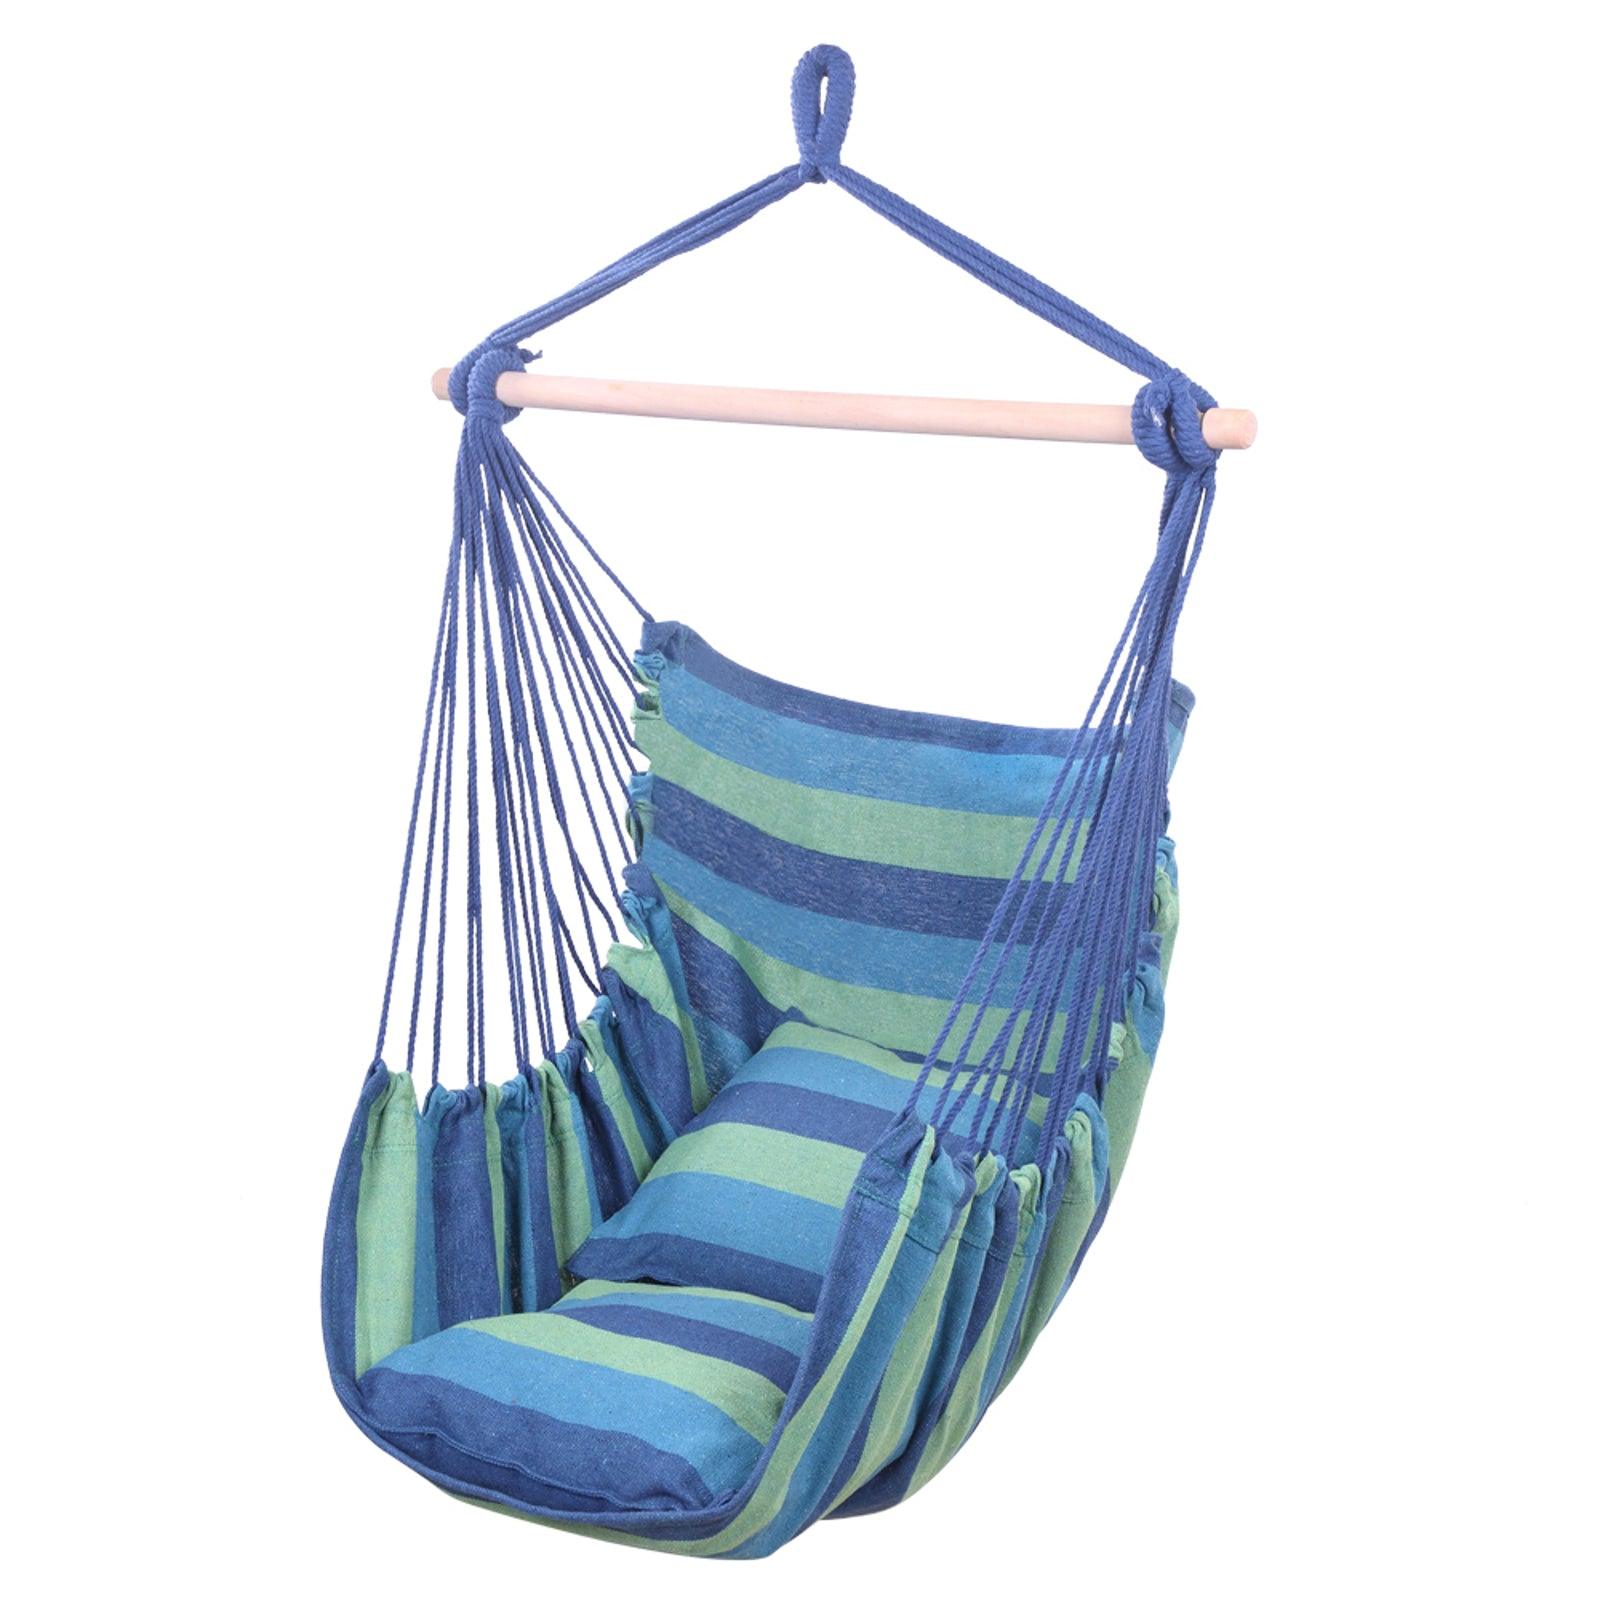 Hanging Chair / Hammock Swing Chair / Canvass Cotton Robe with Pillows (Blue) - Charming Spaces